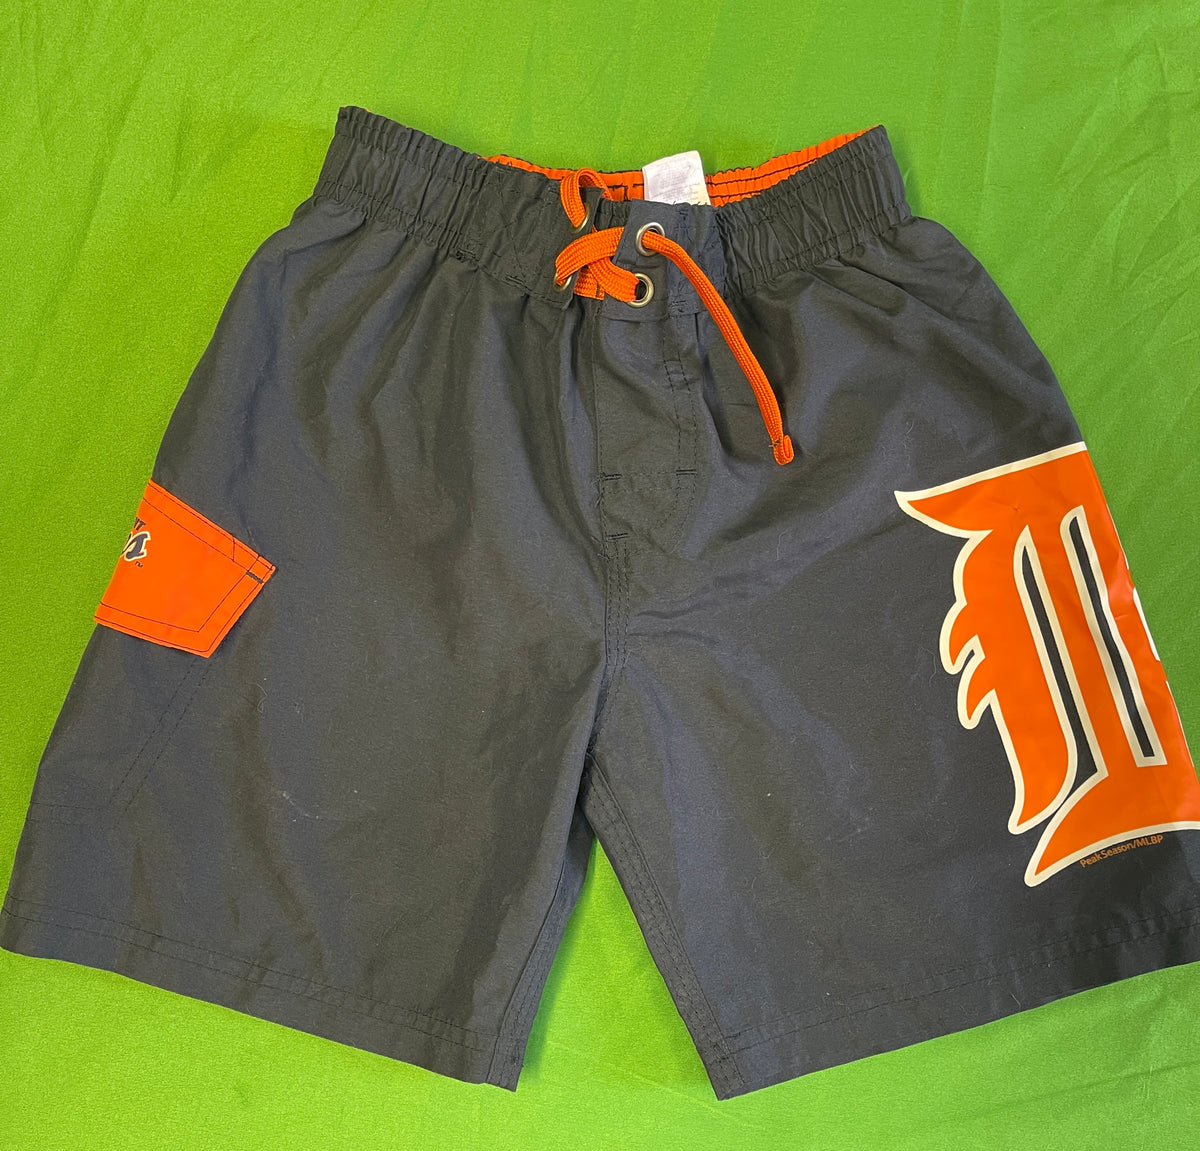 MLB Detroit Tigers Swimming Trunks/Shorts Youth Small 6-8